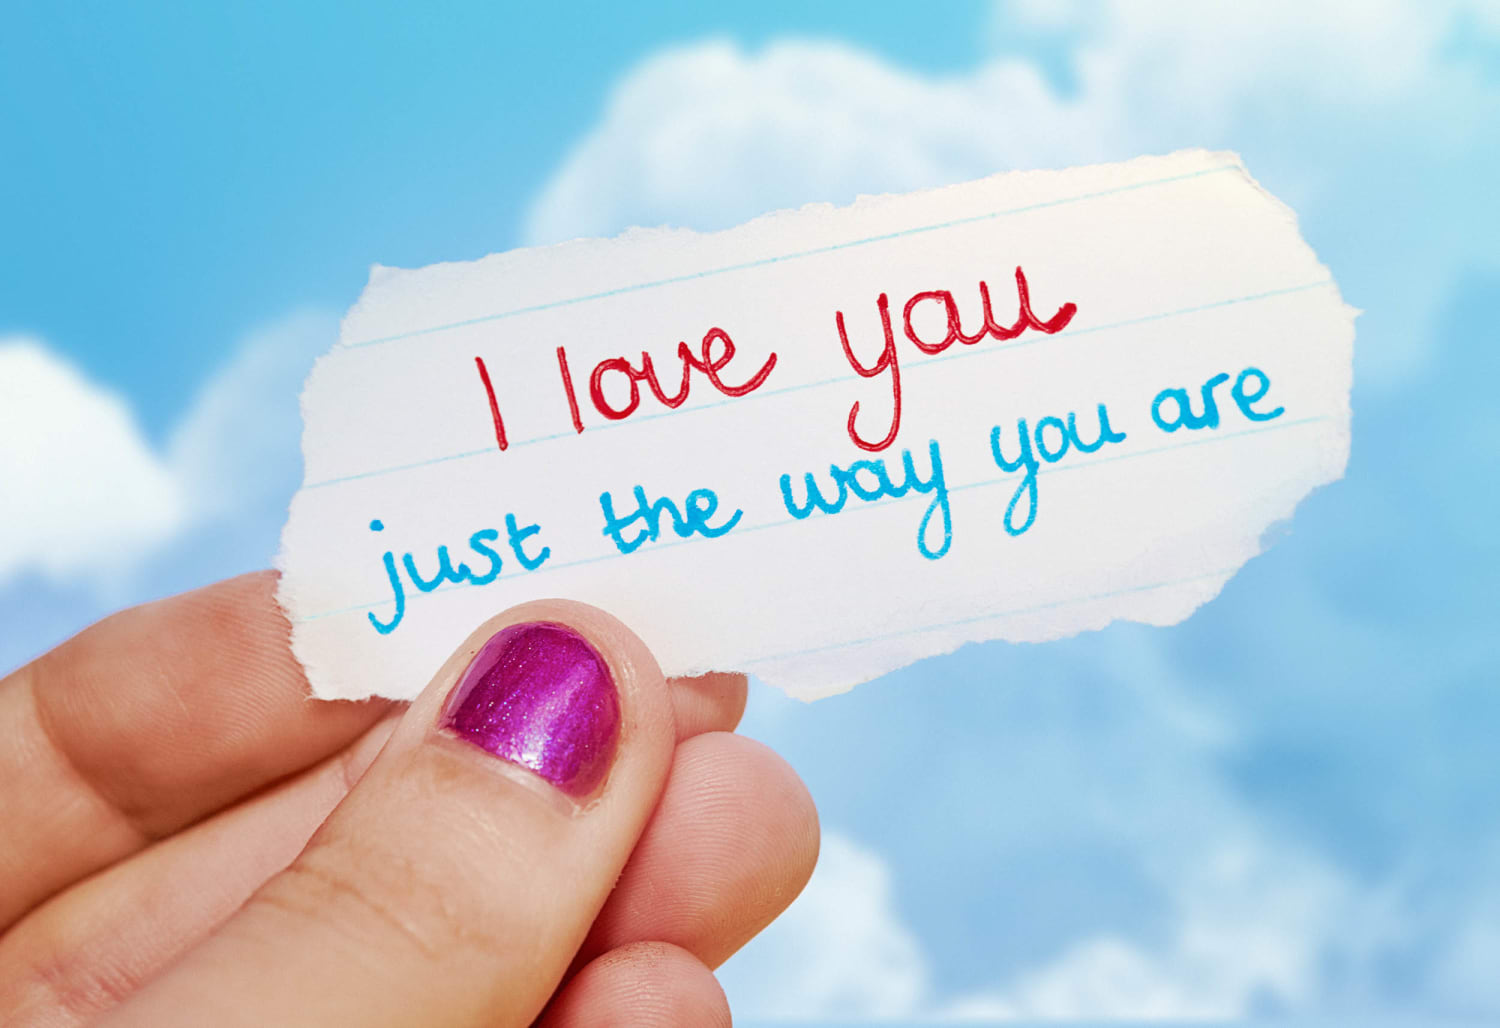 wallpapers with messages about love